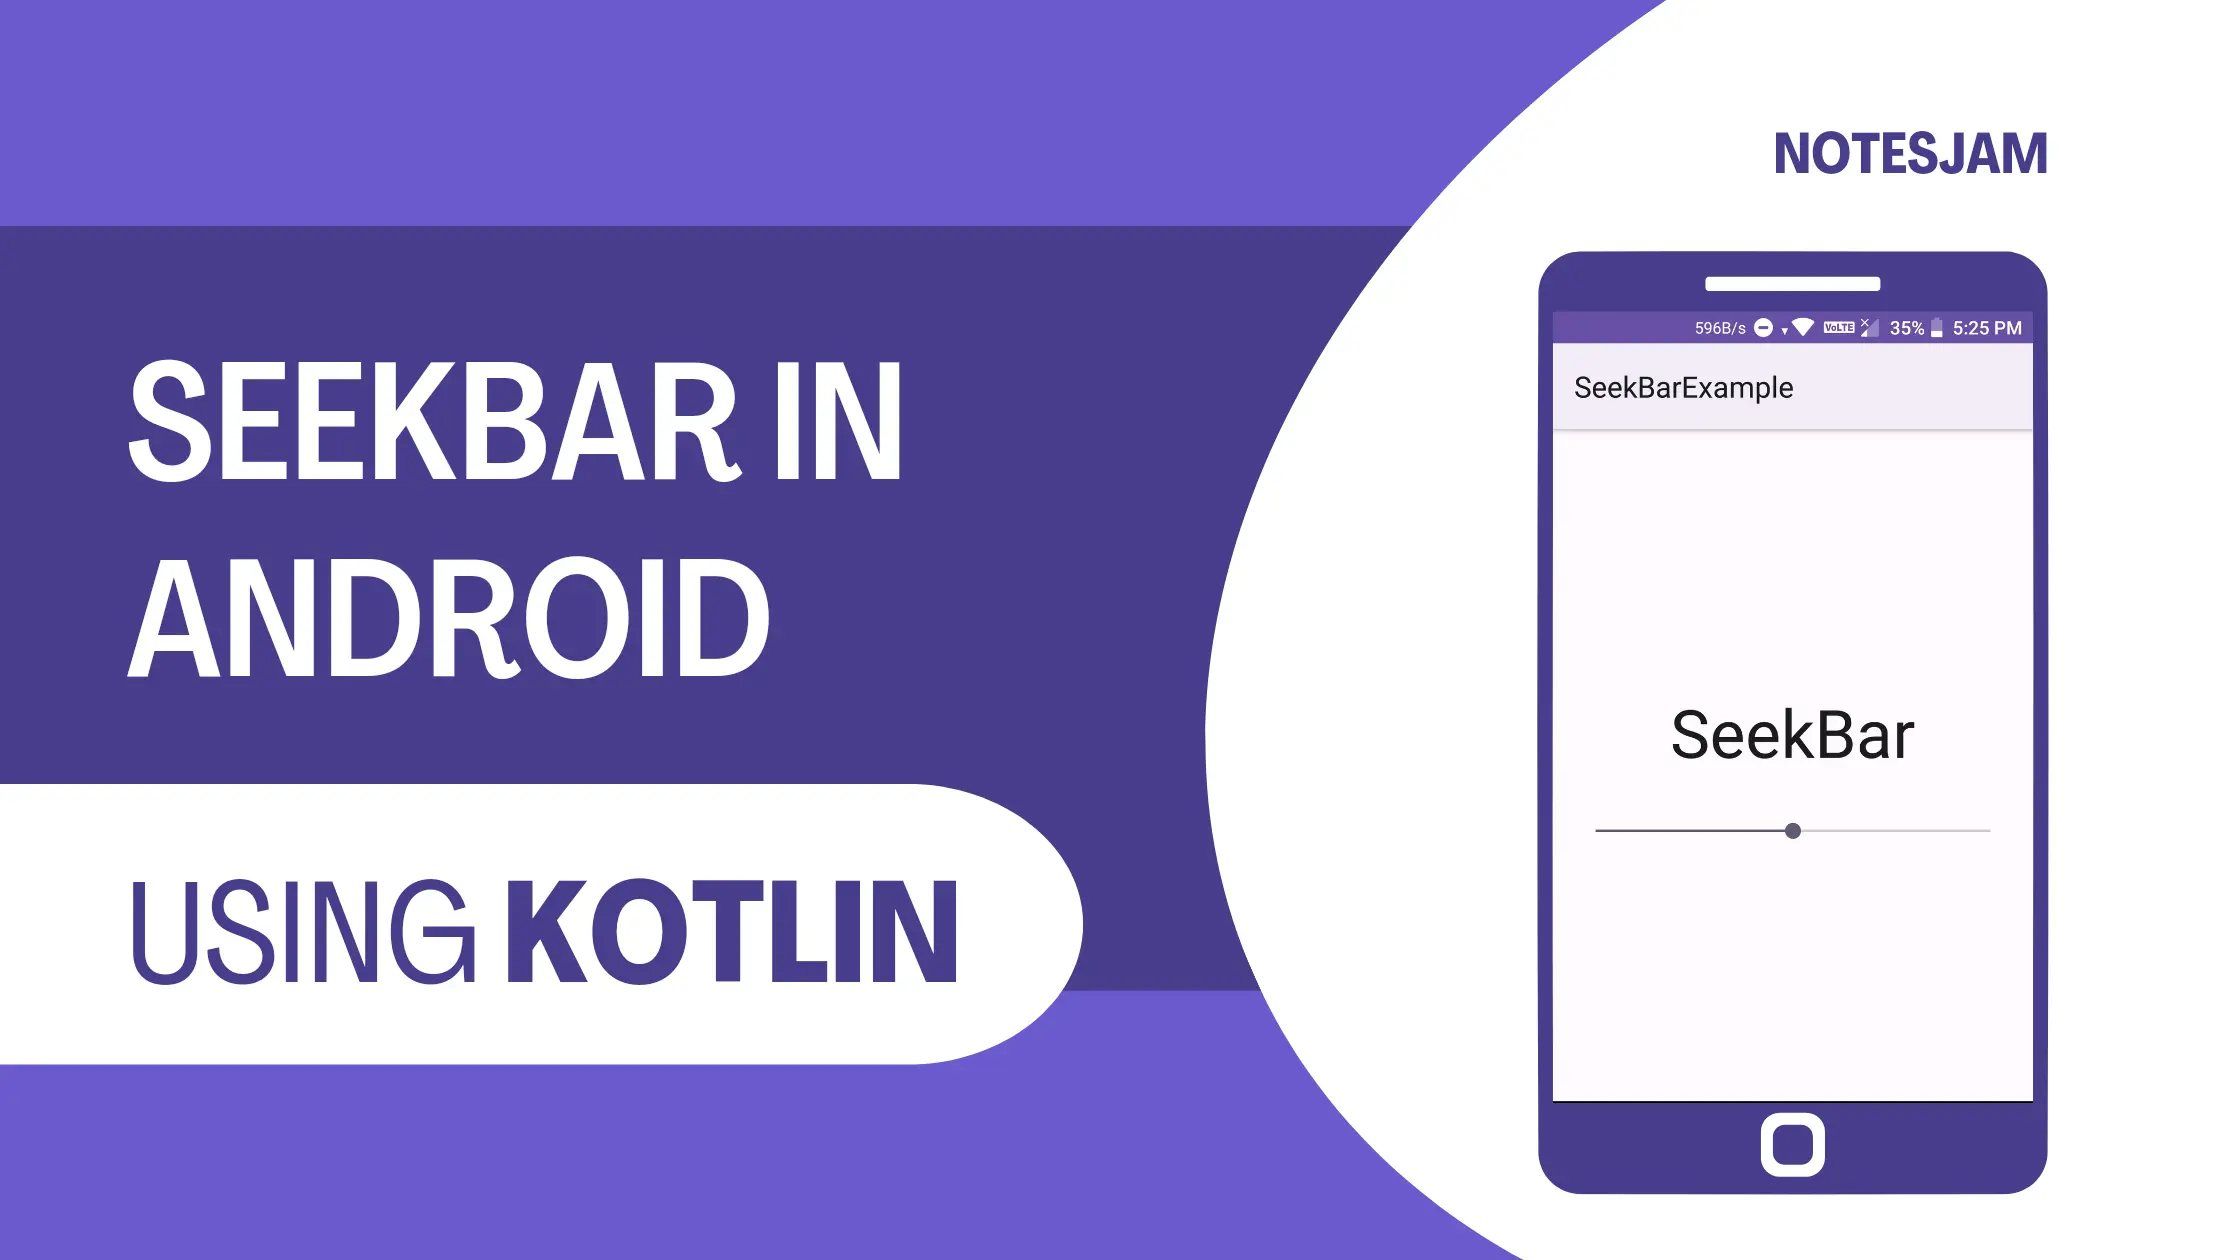 SeekBar in Android using Kotlin: A Practical Guide with Examples